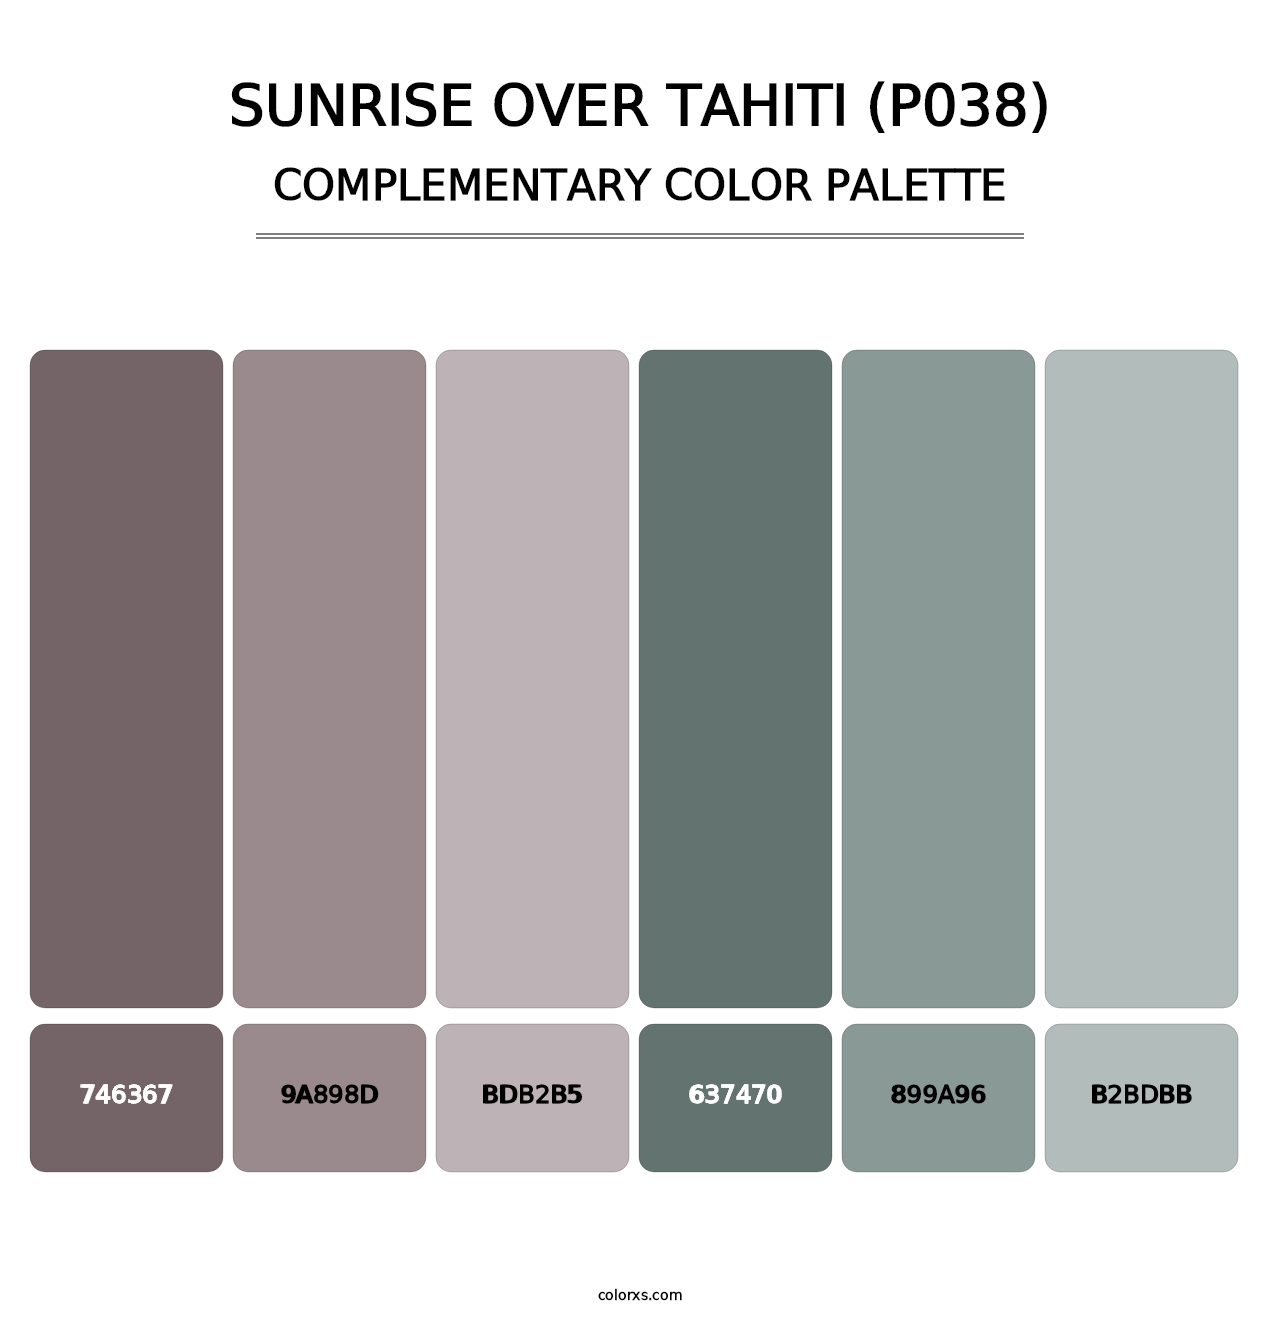 Sunrise Over Tahiti (P038) - Complementary Color Palette